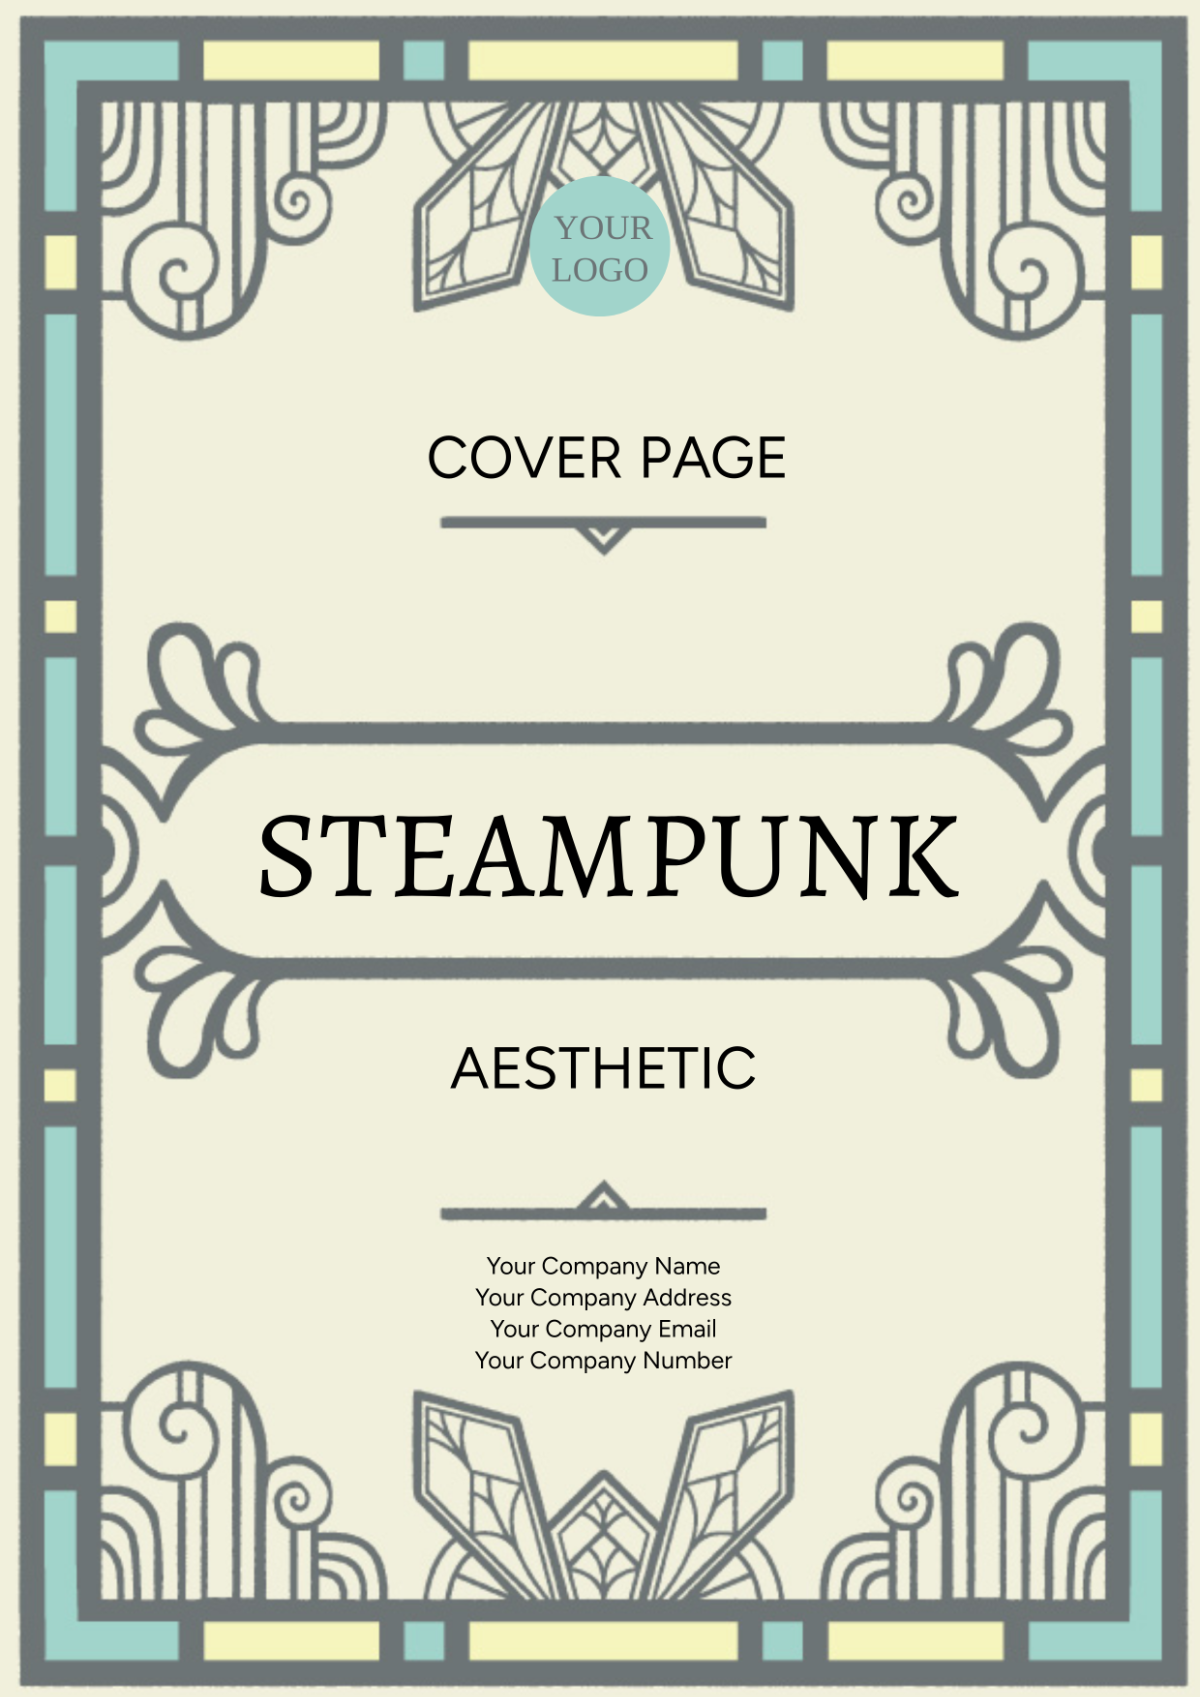 Steampunk Aesthetic Cover Page